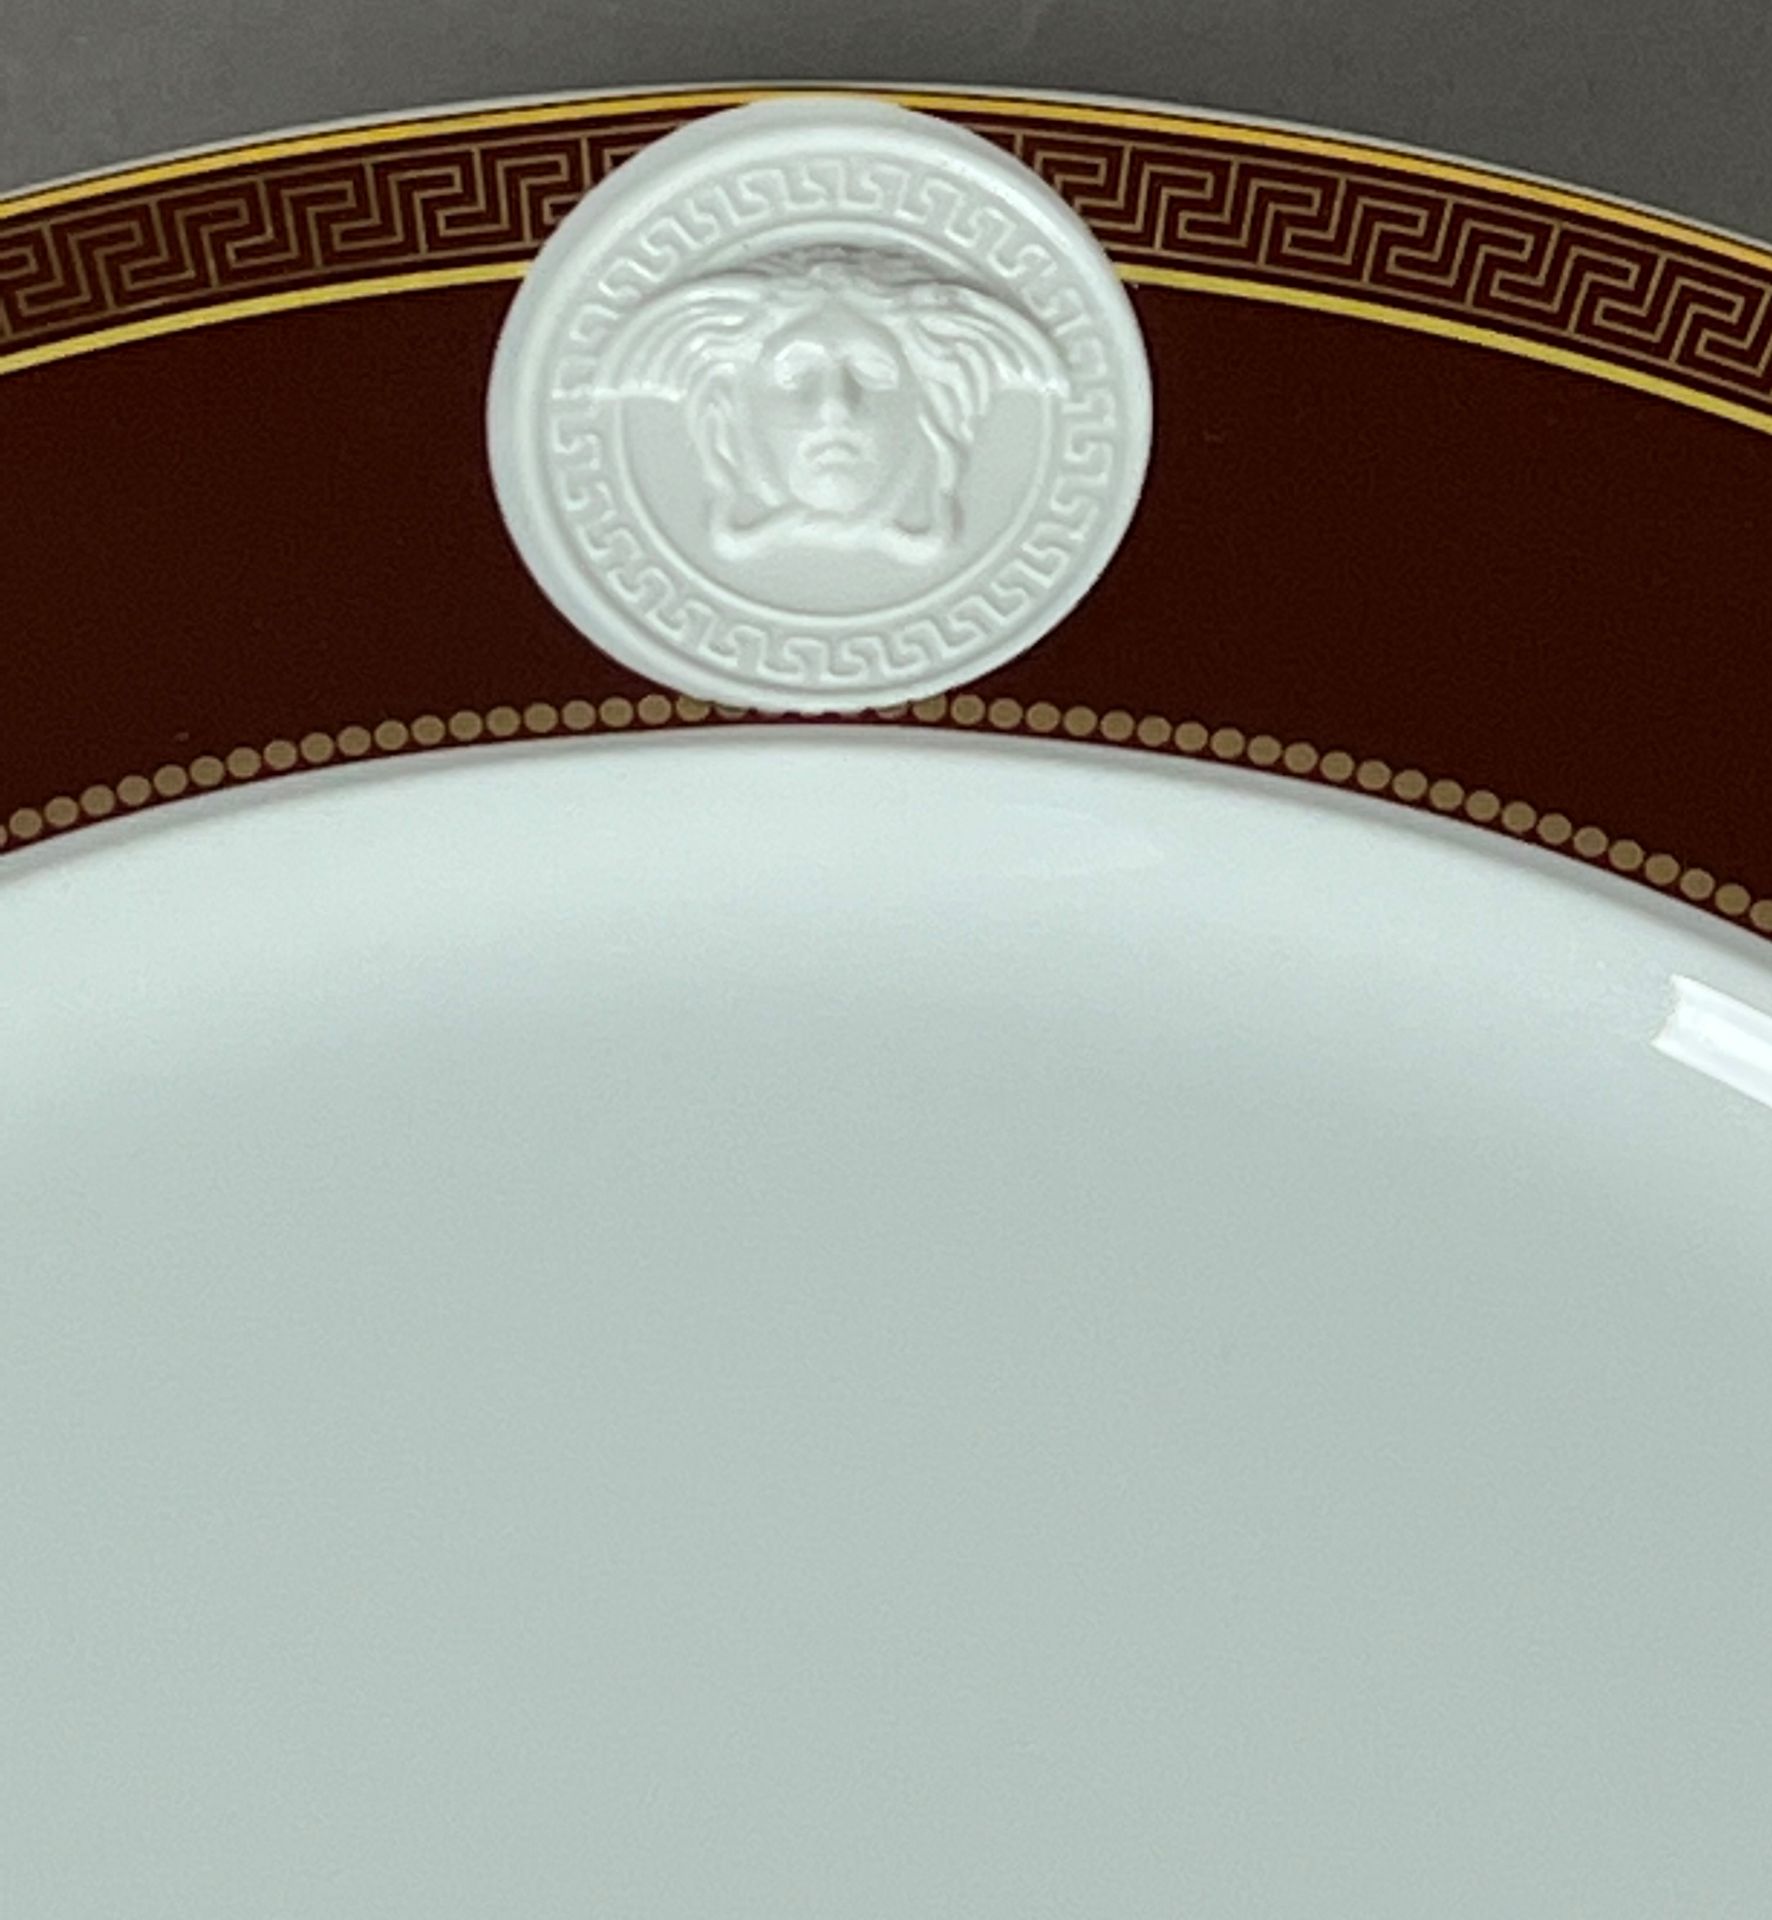 VERSACE by ROSENTHAL studio-line "Medaillon Meandre Marron". Six place settings. - Image 3 of 5